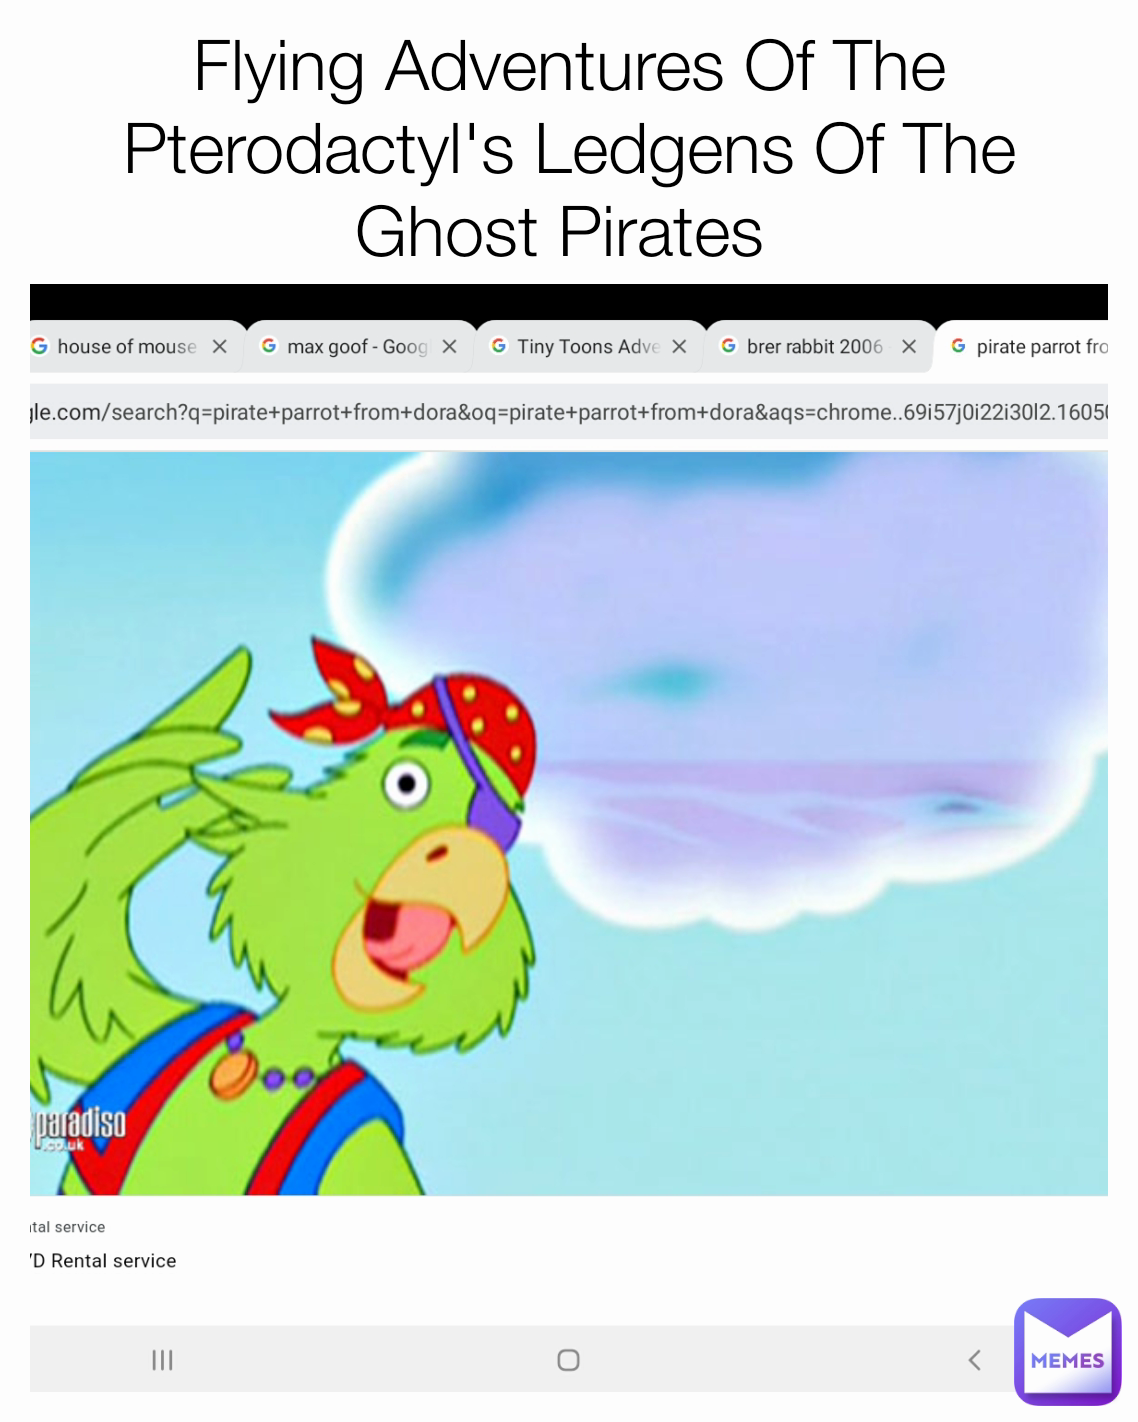 Flying Adventures Of The Pterodactyl's Ledgens Of The Ghost Pirates 

Scalzi The Pirate Parrot .